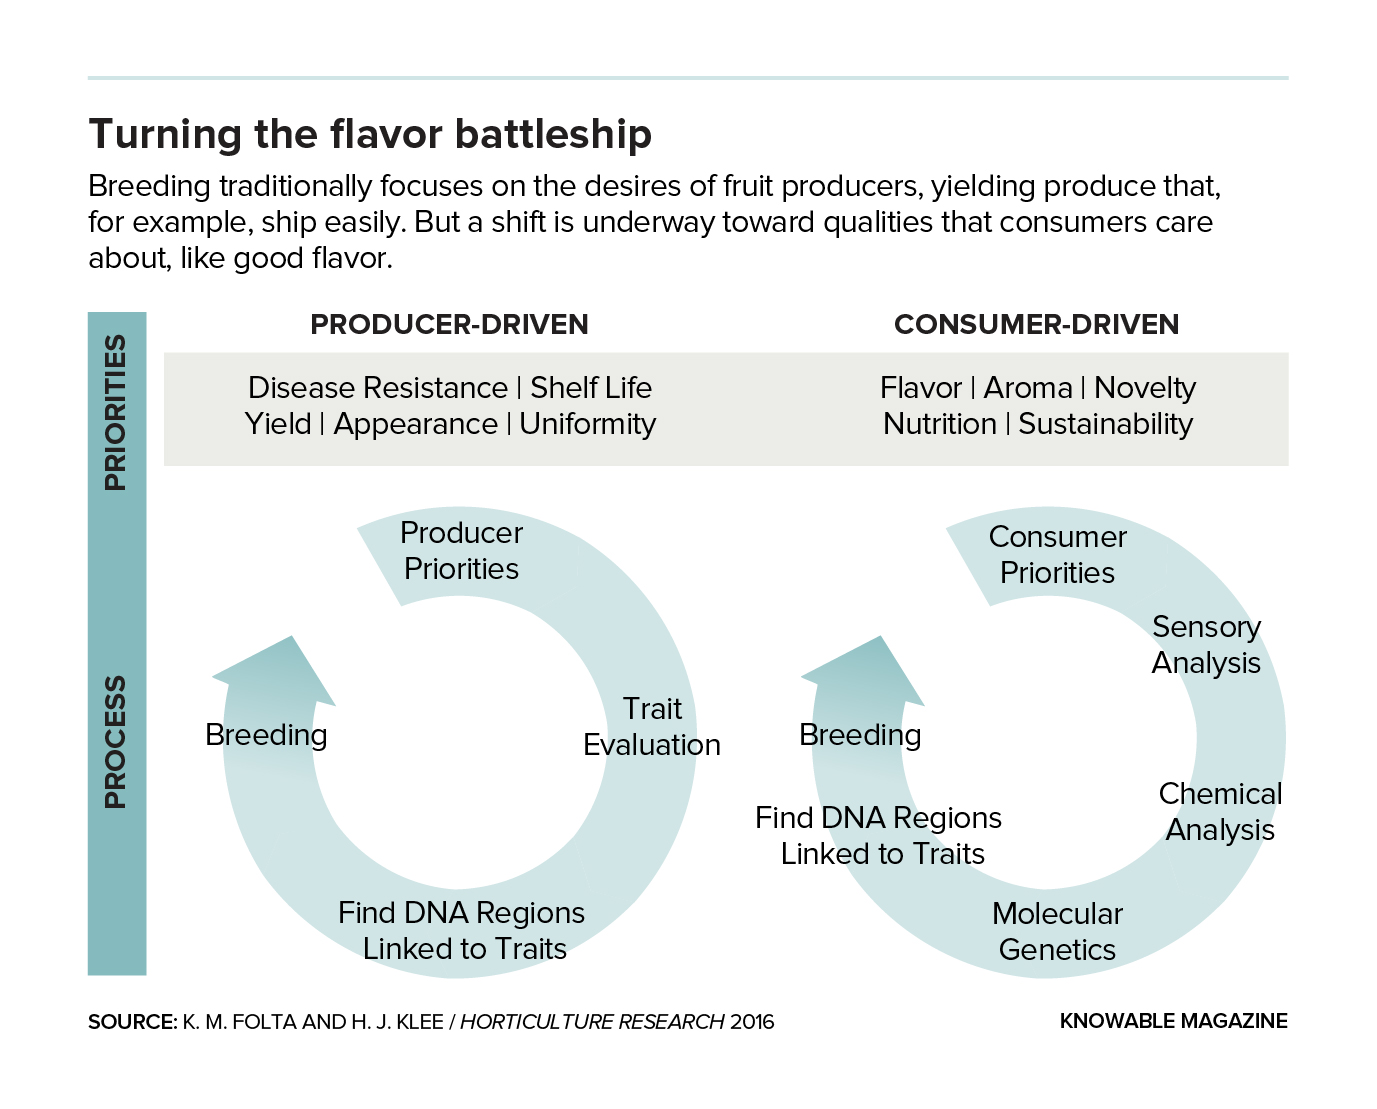 Graphic showing how breeding processes are different for consumer and grower/producers